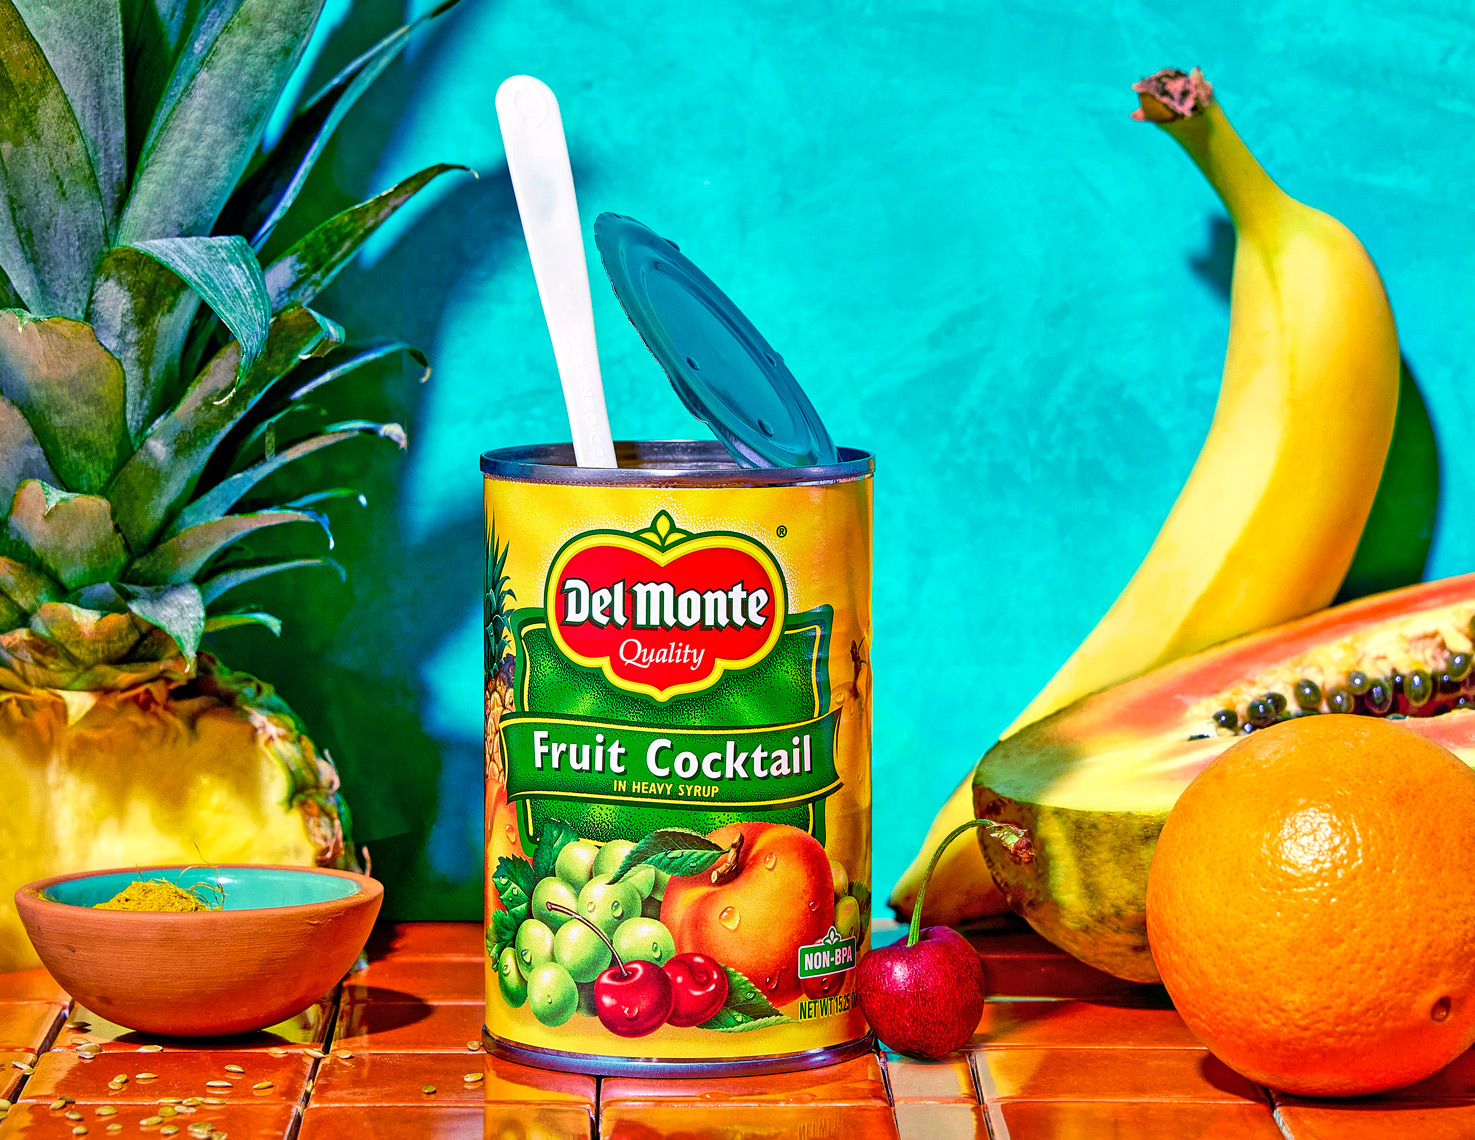 Marx_Photography_Food_Fruit_Del Monte_Product